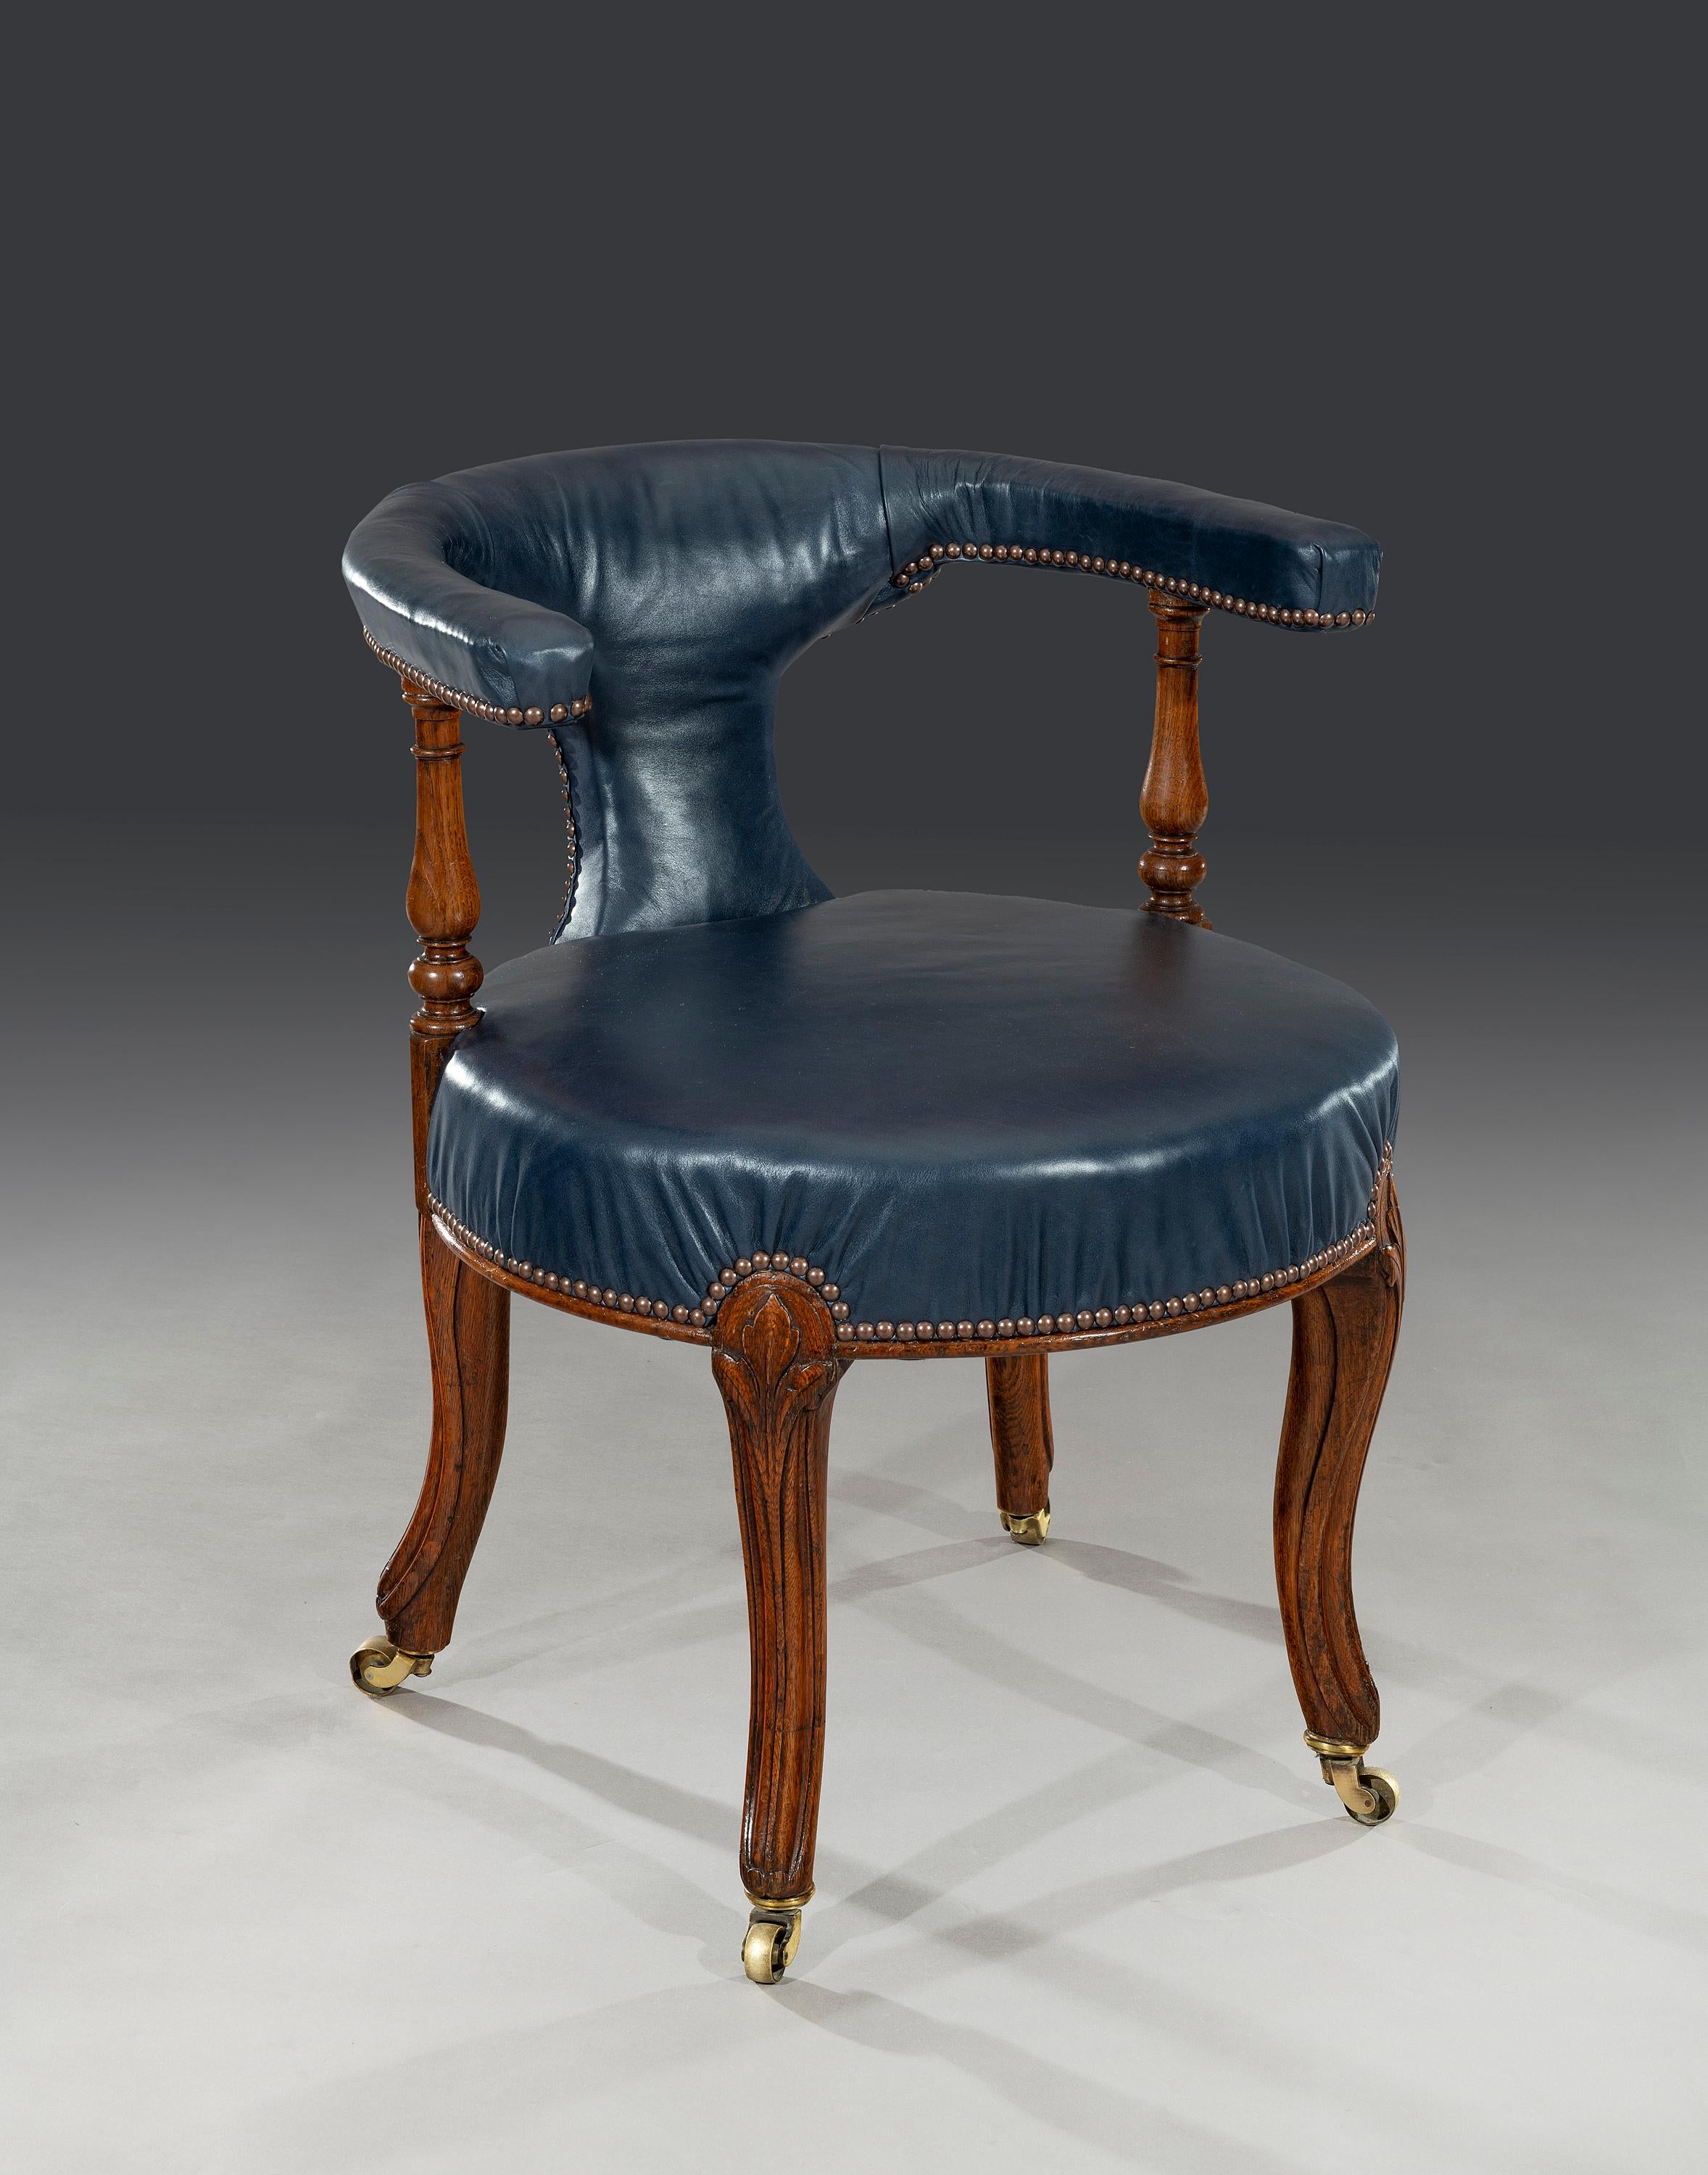 The circular seat is firmly upholstered in a blue leather as is the 'horseshoe' shaped back rail that is supported on turned oak columns. The front legs are carved with some relief decoration with plain shaped legs to the reverse. The leather